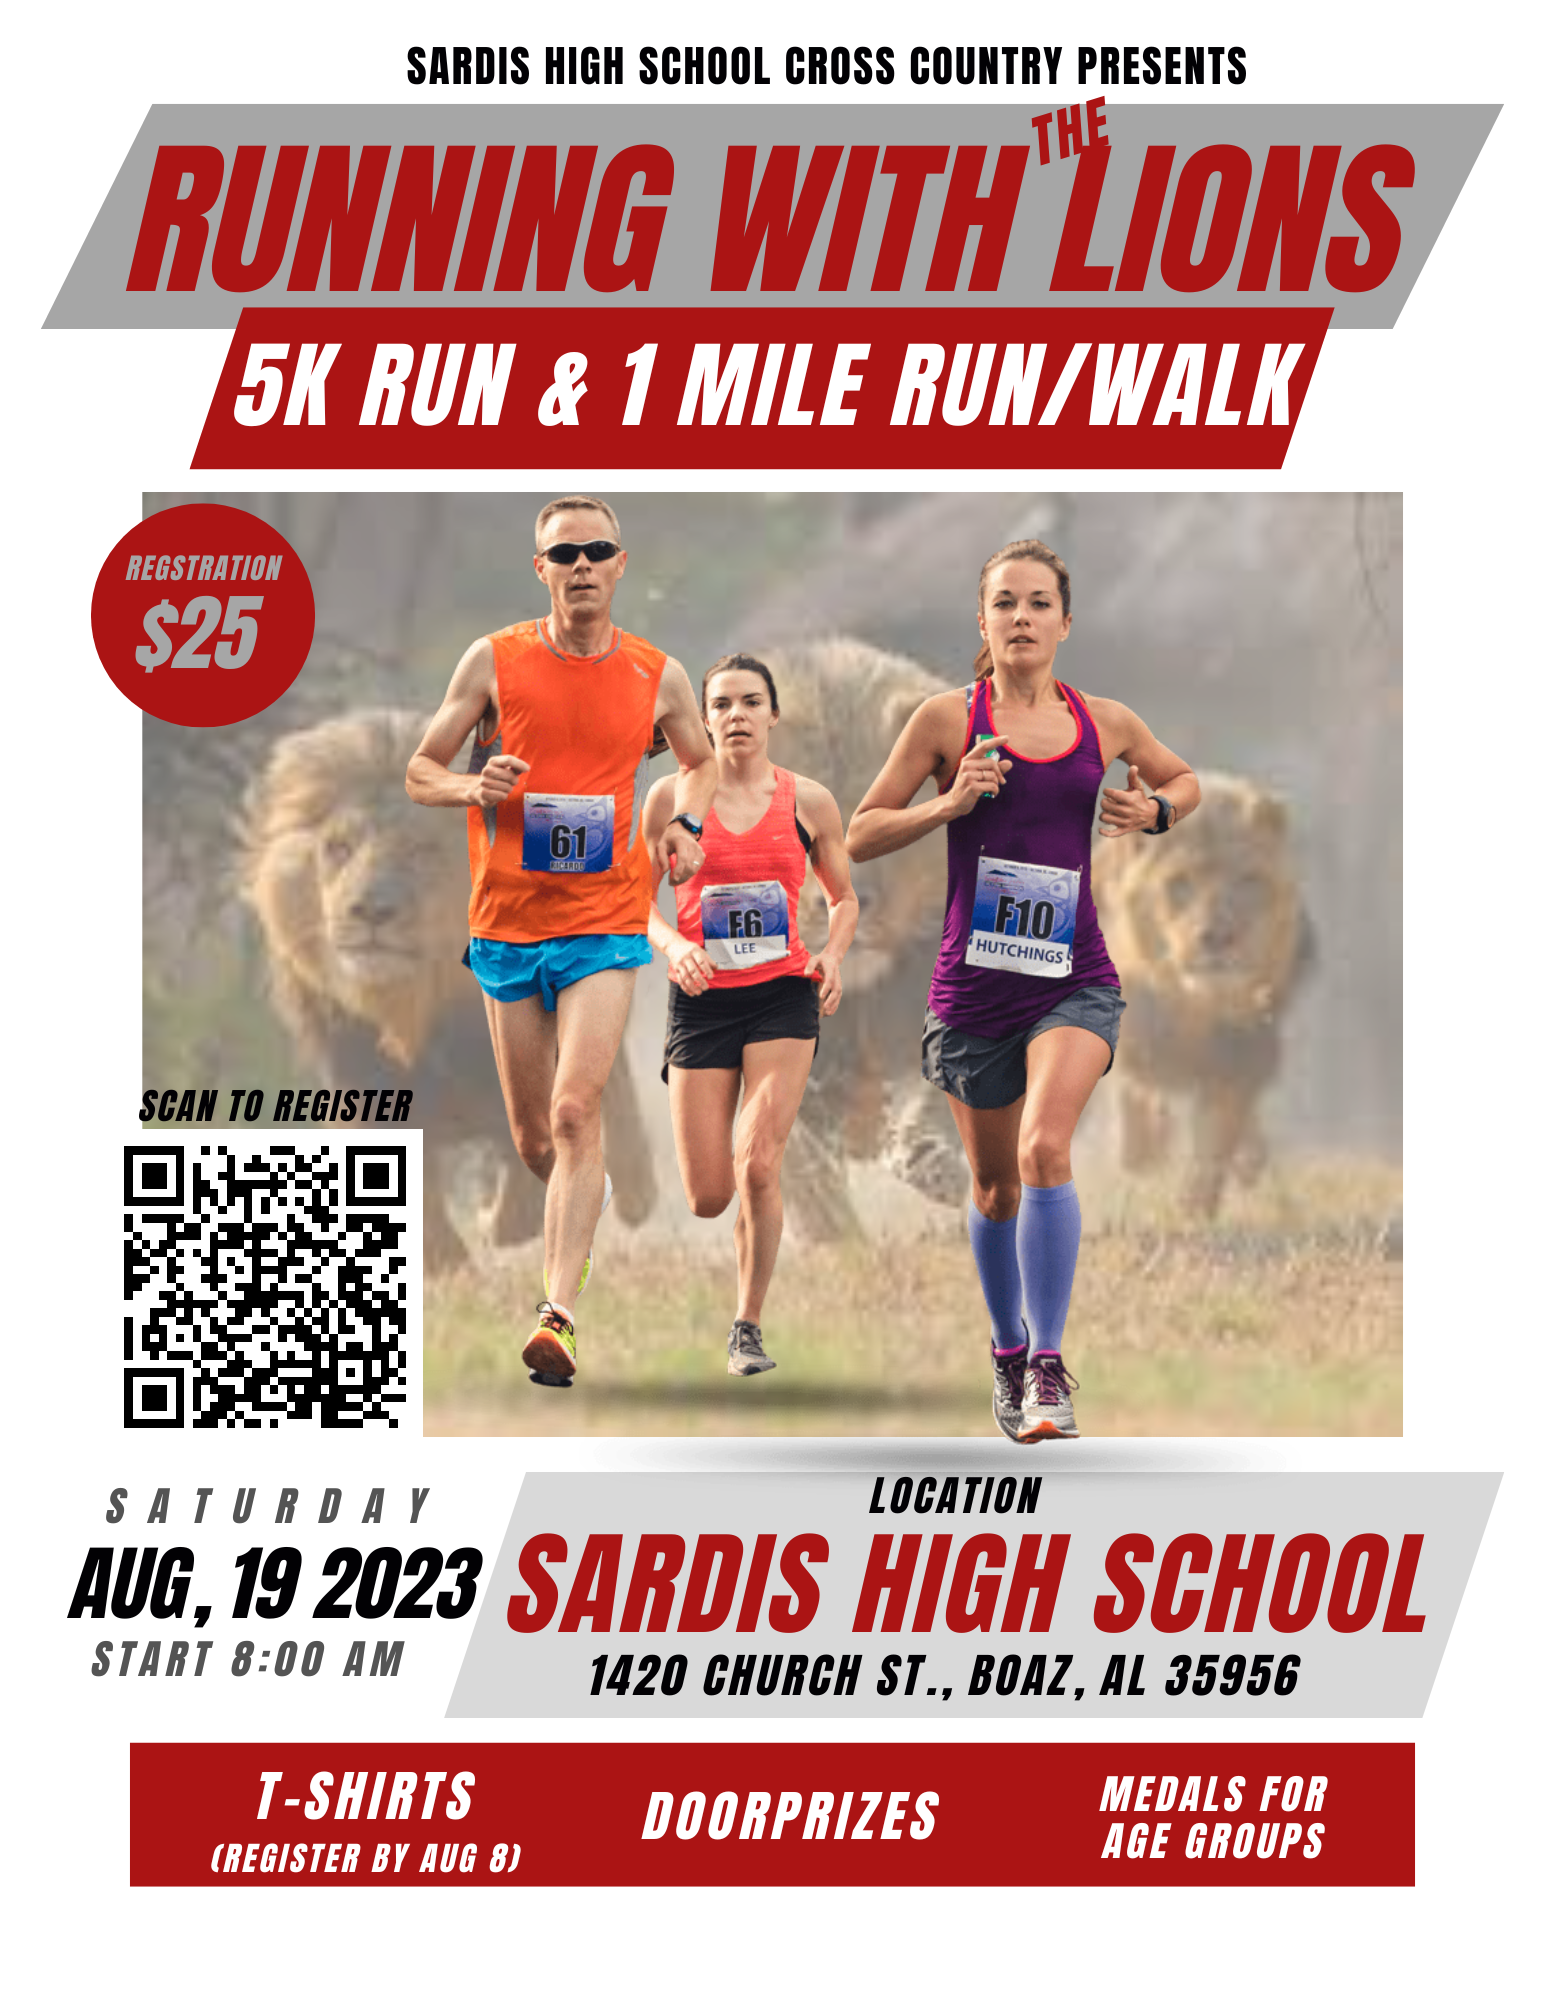 Running With the Lions Events Anniston Runners Club